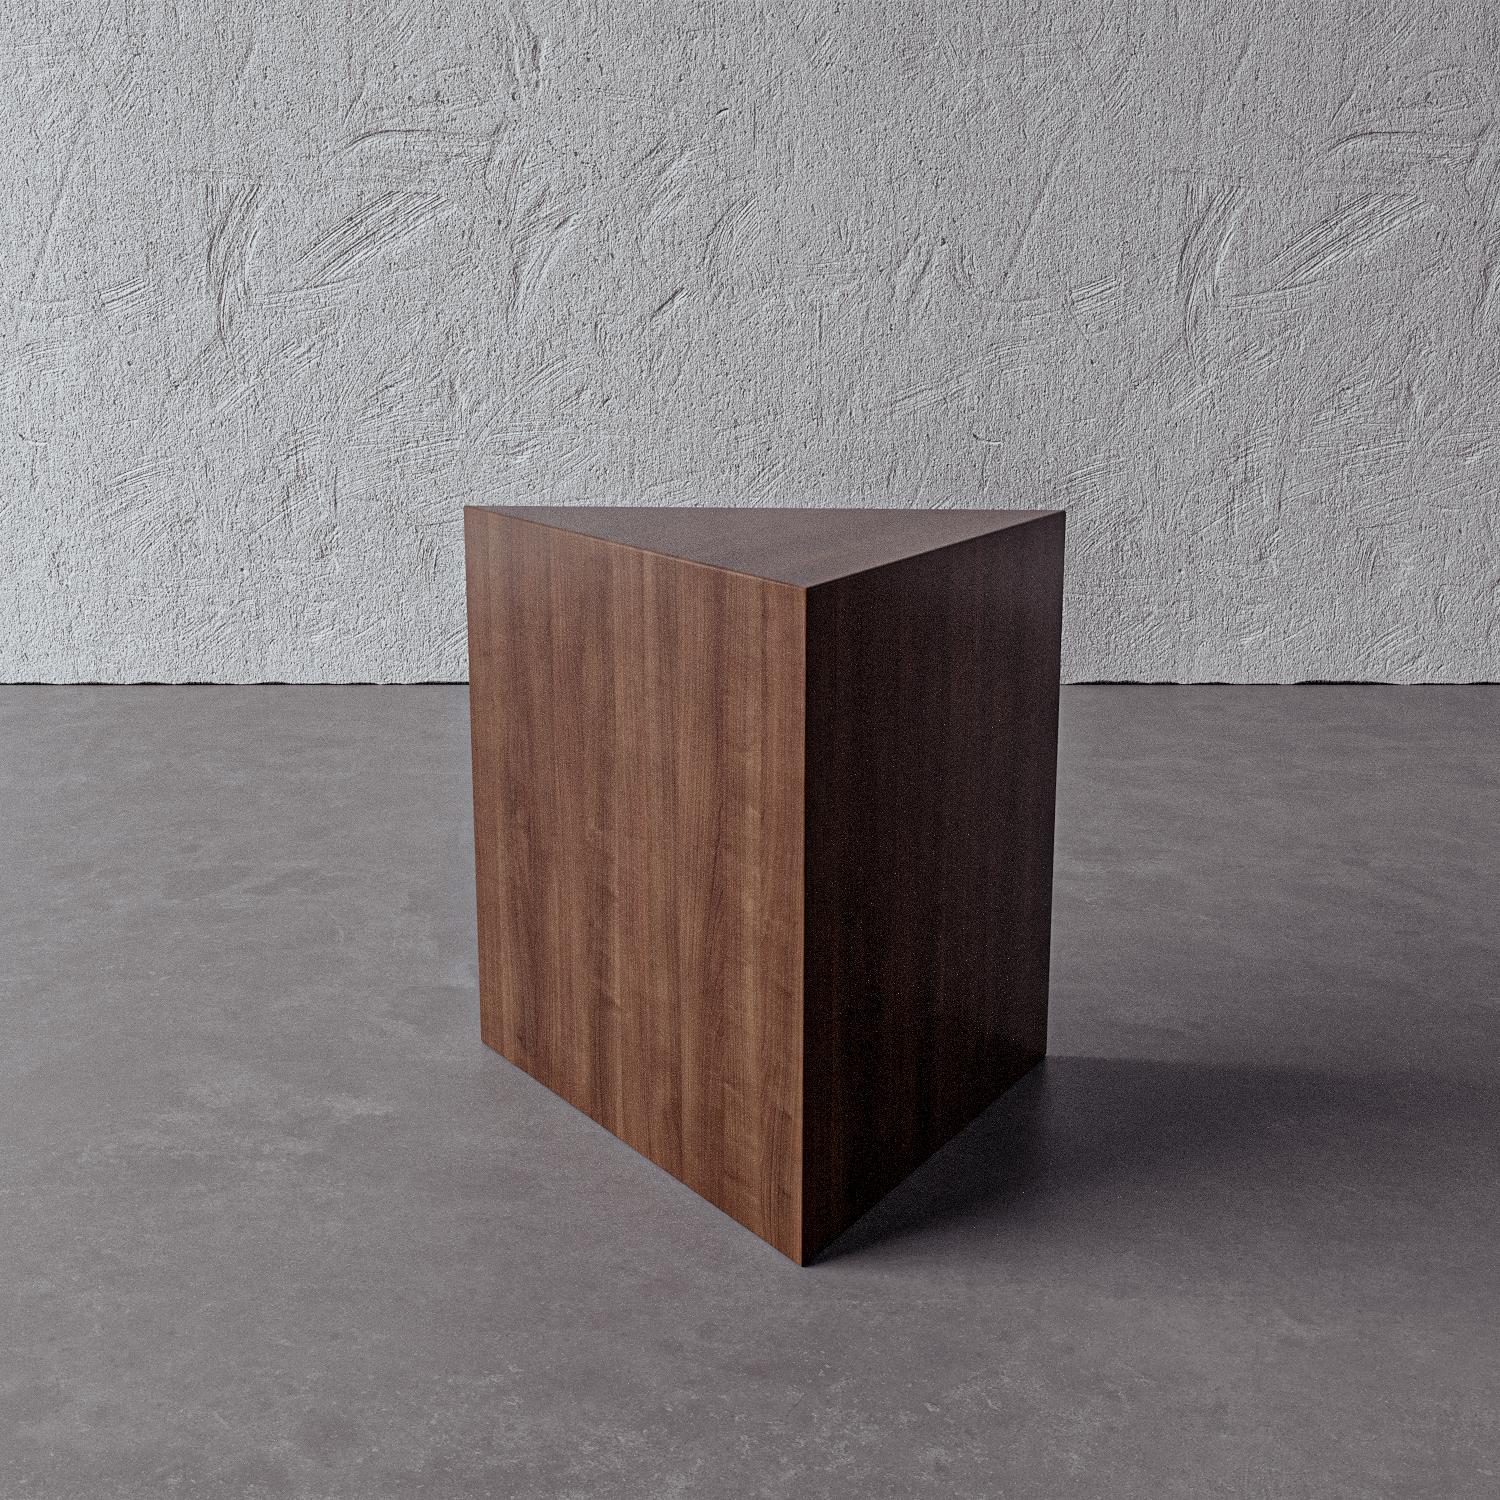 This solid wood triangular design reinterprets the tradition of sculpture as an artful side table. Handmade by artisans in Vietnam, this modern, functional piece is beautiful on its own or grouped with Galois and Appell.